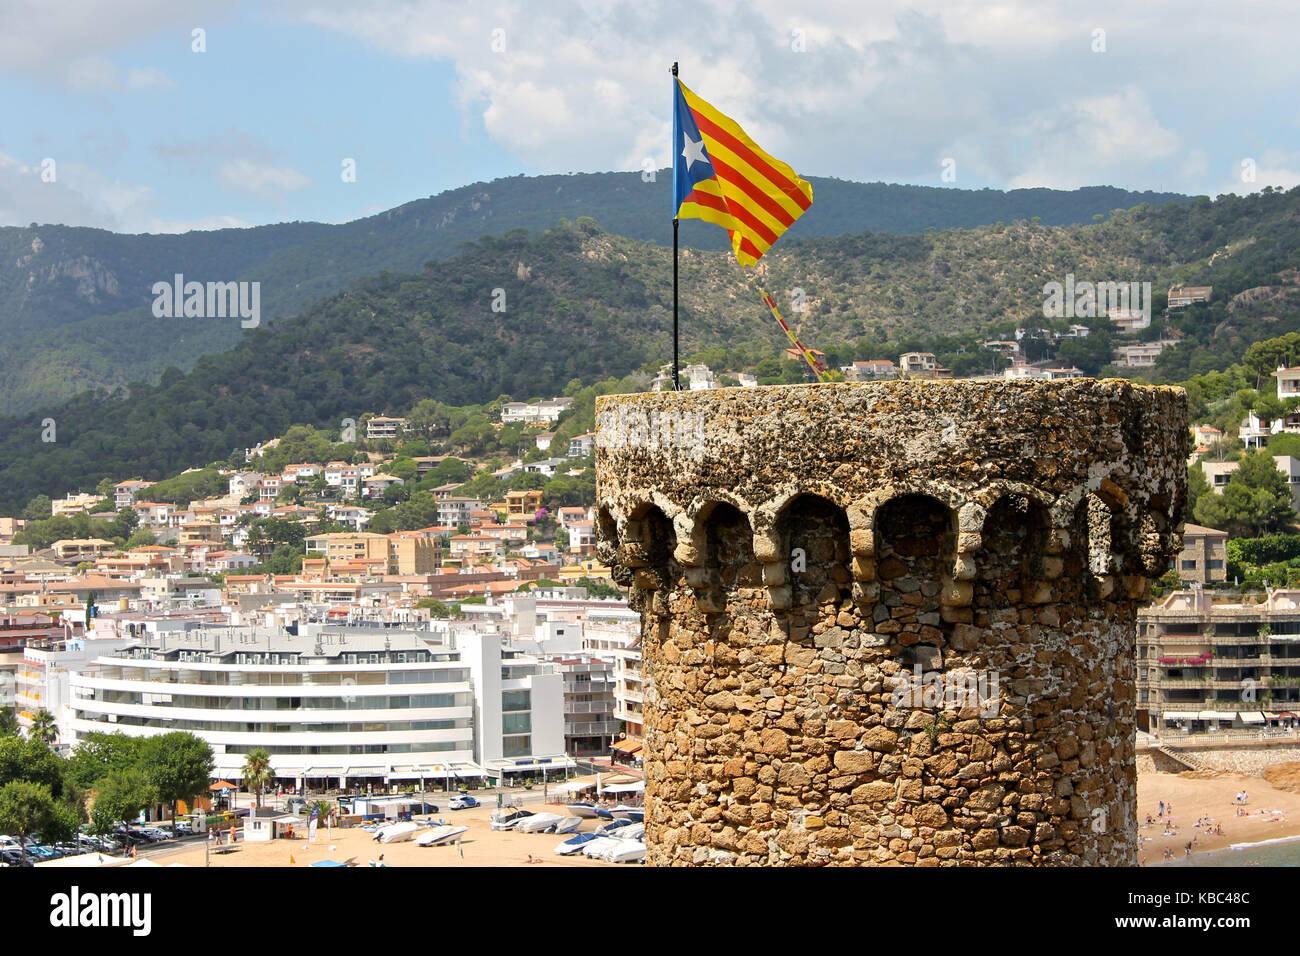 A Senyera estelada, the unofficial flag typically flown by Catalan independence supporters, waving on the tower of Tossa de Mar Fortress, Catalonia, S Stock Photo